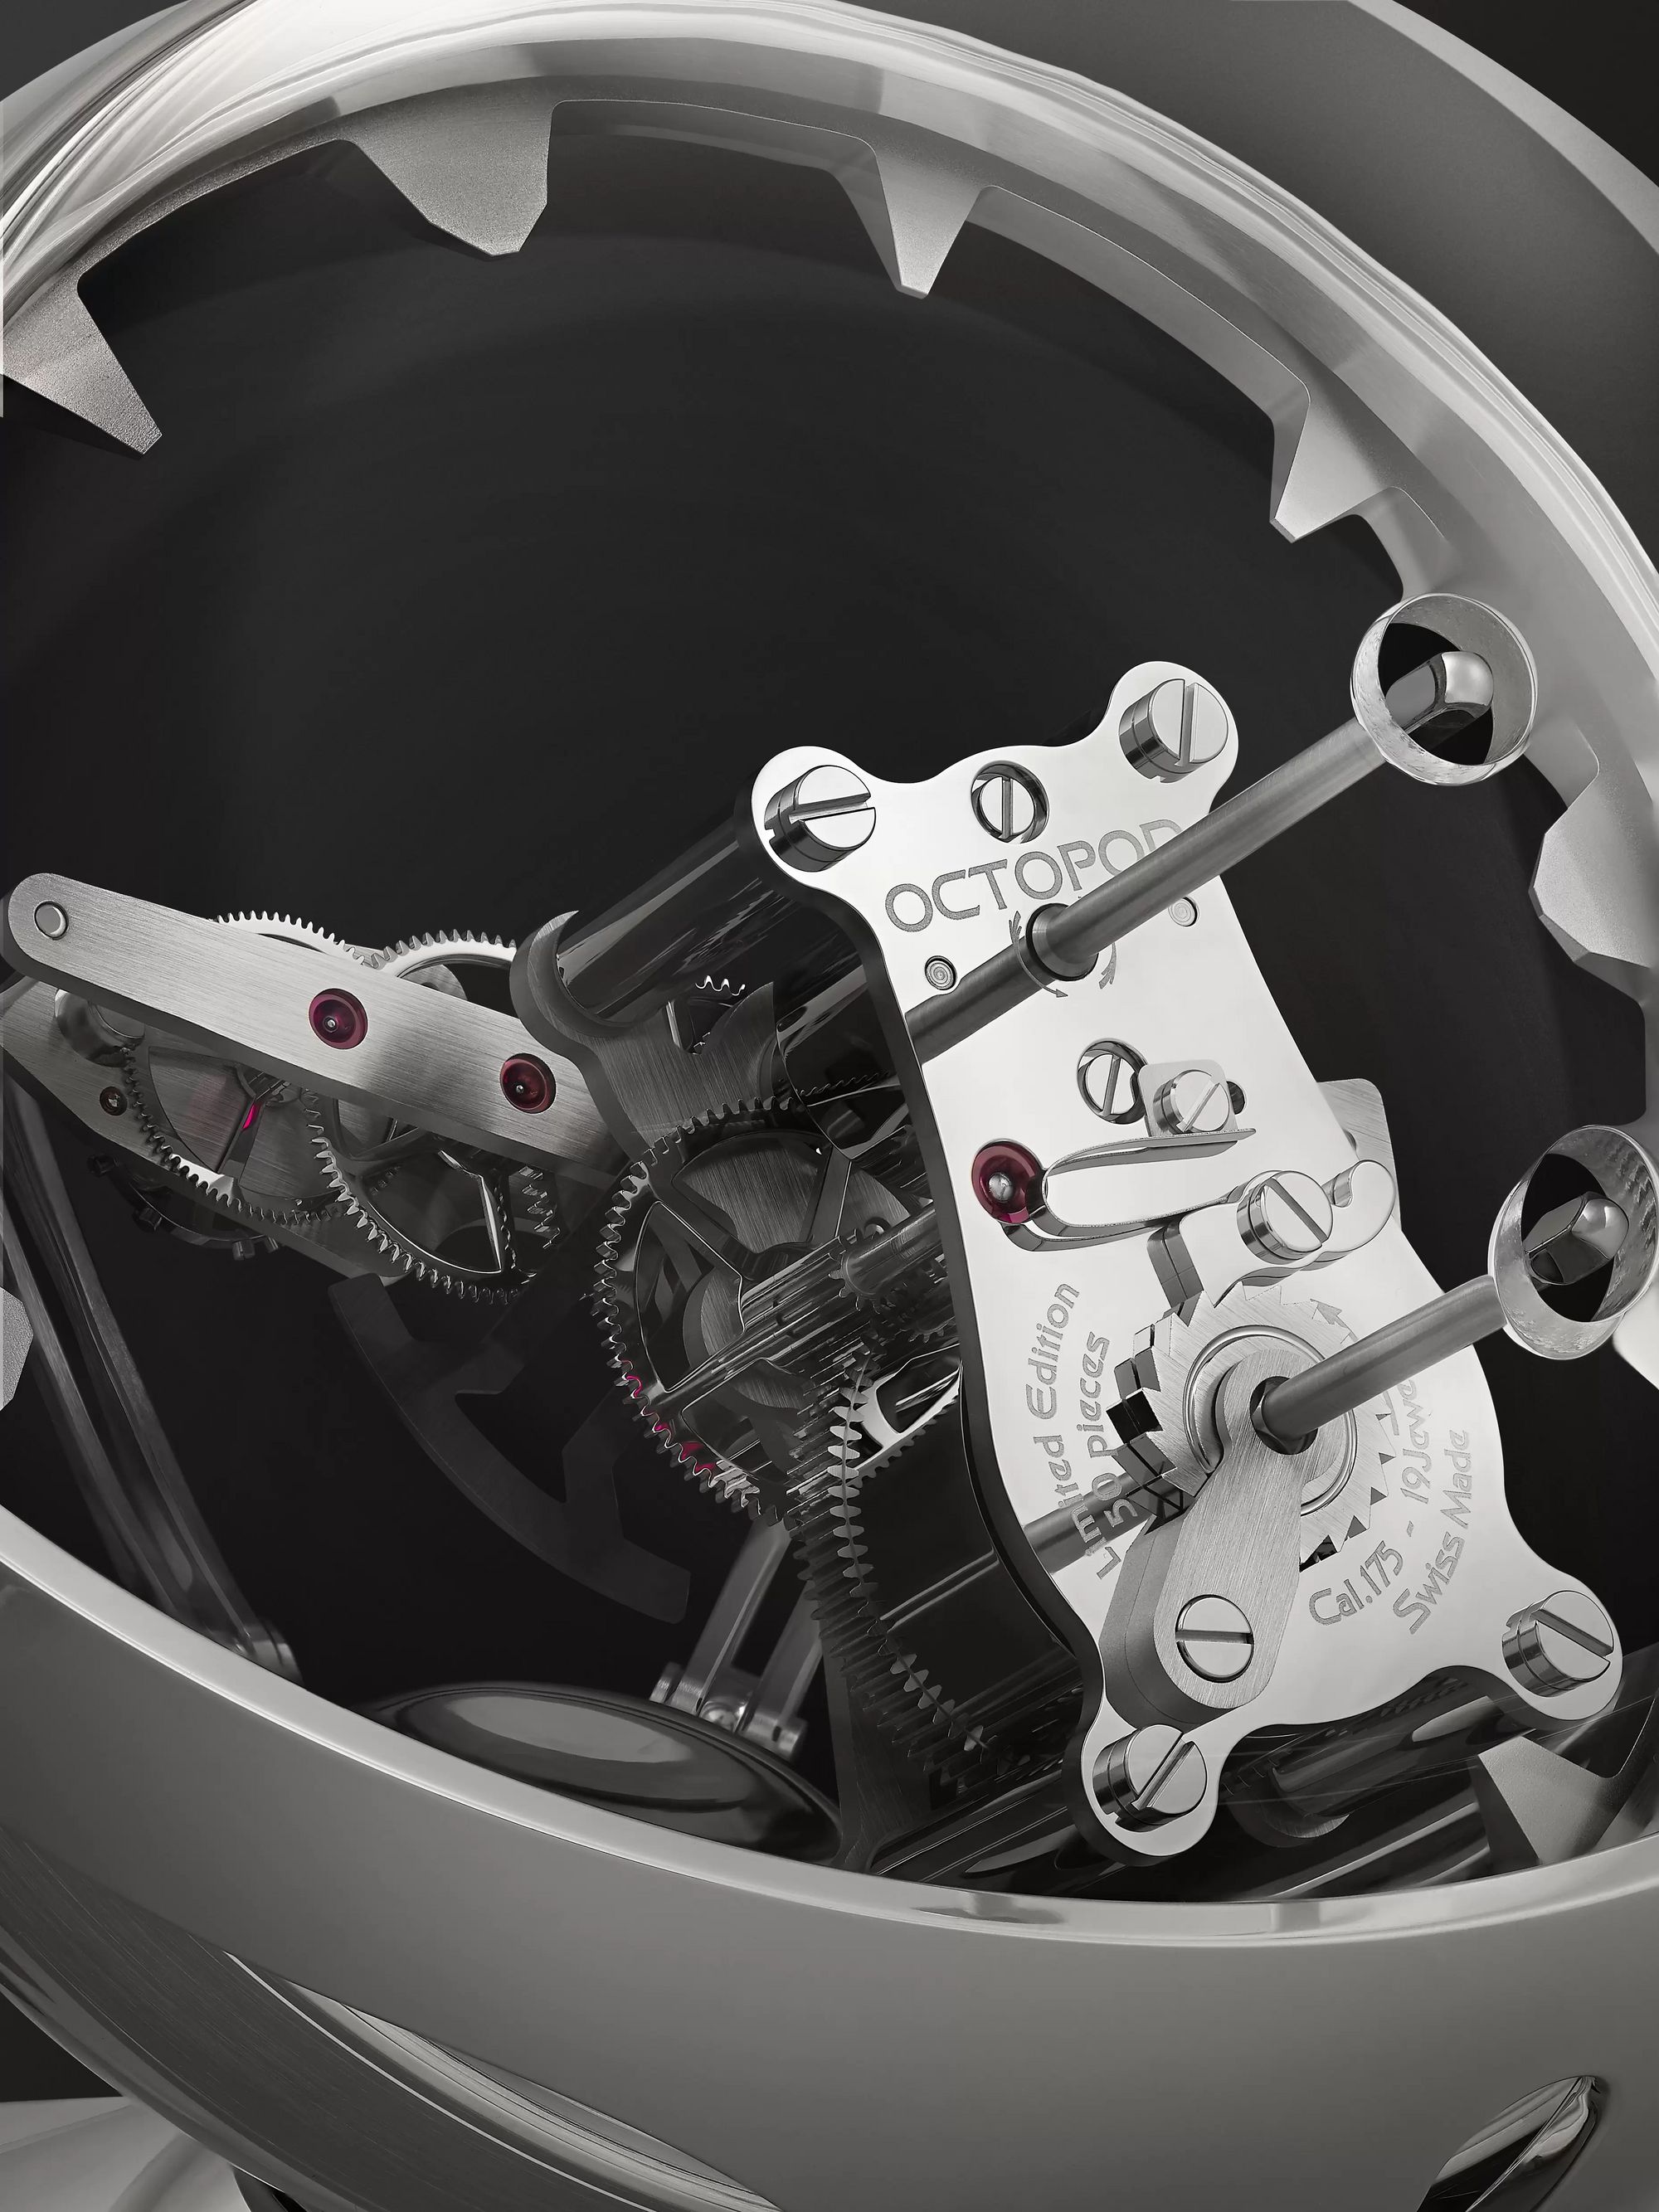 MB&F + L'Epée 1839 Octopod Hand-Wound Stainless Steel, Nickel and Palladium-Plated Table Clock, Ref. No. 11.6000/201